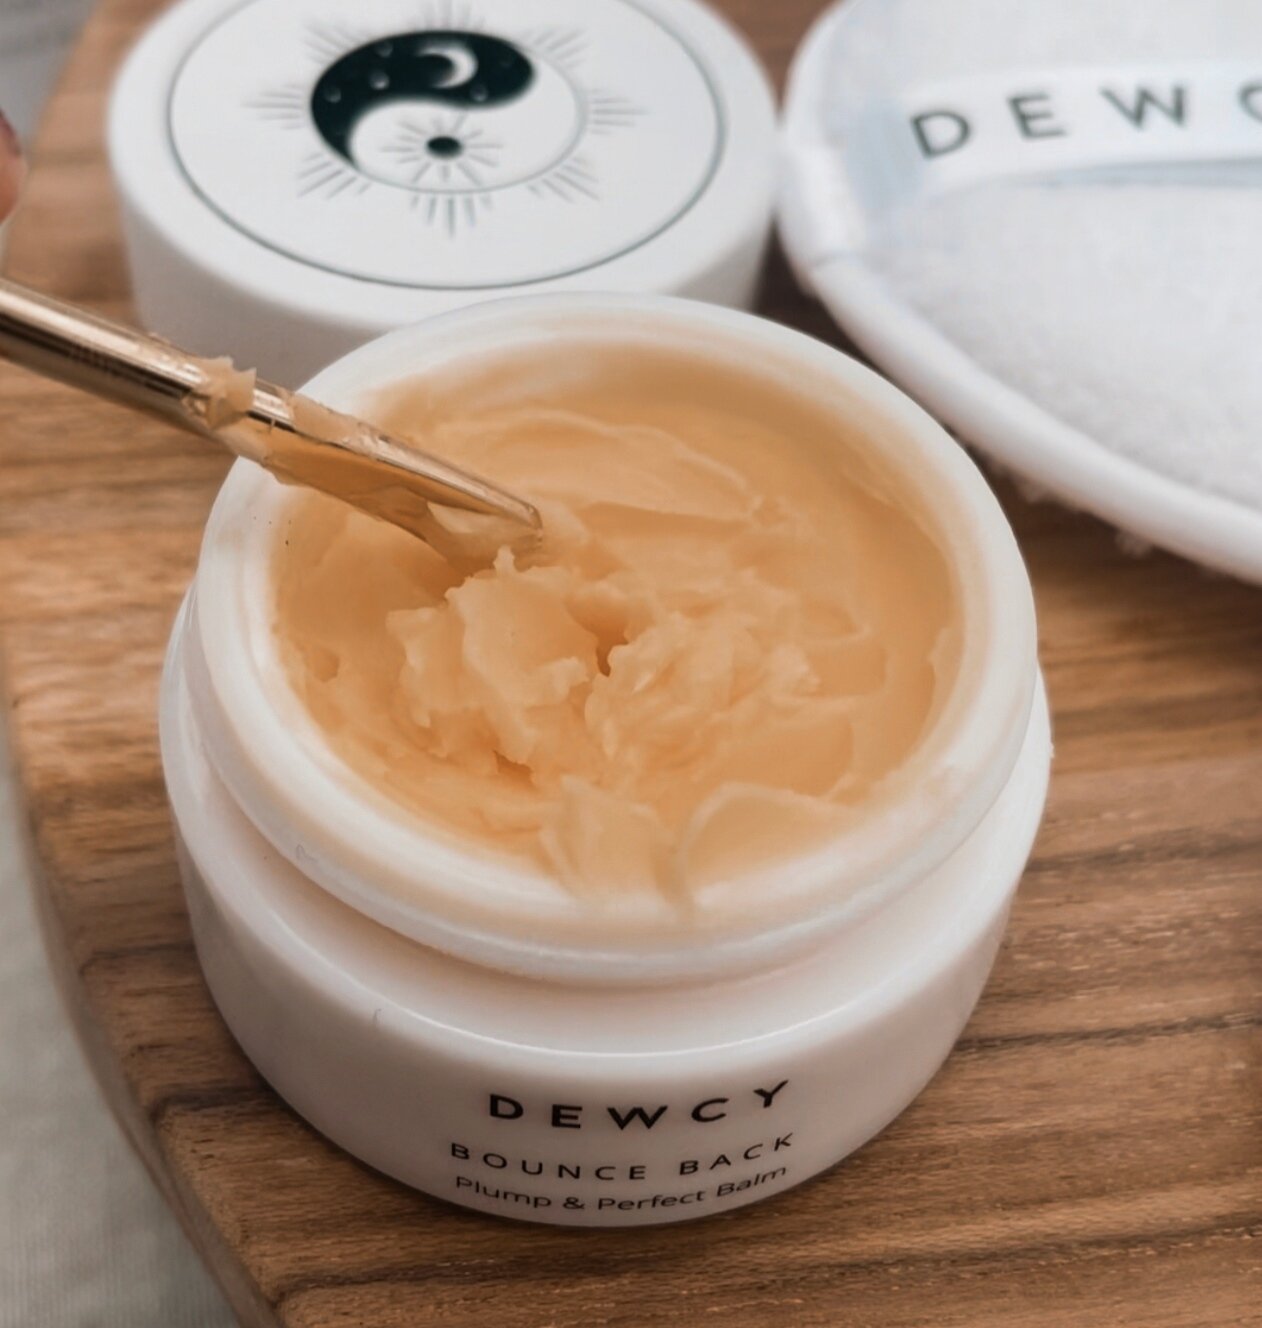 Creamy &amp; oh so dreamy ☁️ 

Our waterless formula ensures our balms are concentrated. Meaning one balm pot lasts up to 10 months, even when used daily!

You only need a grain of rice amount to cover your face, neck and d&eacute;colletage. Instant 